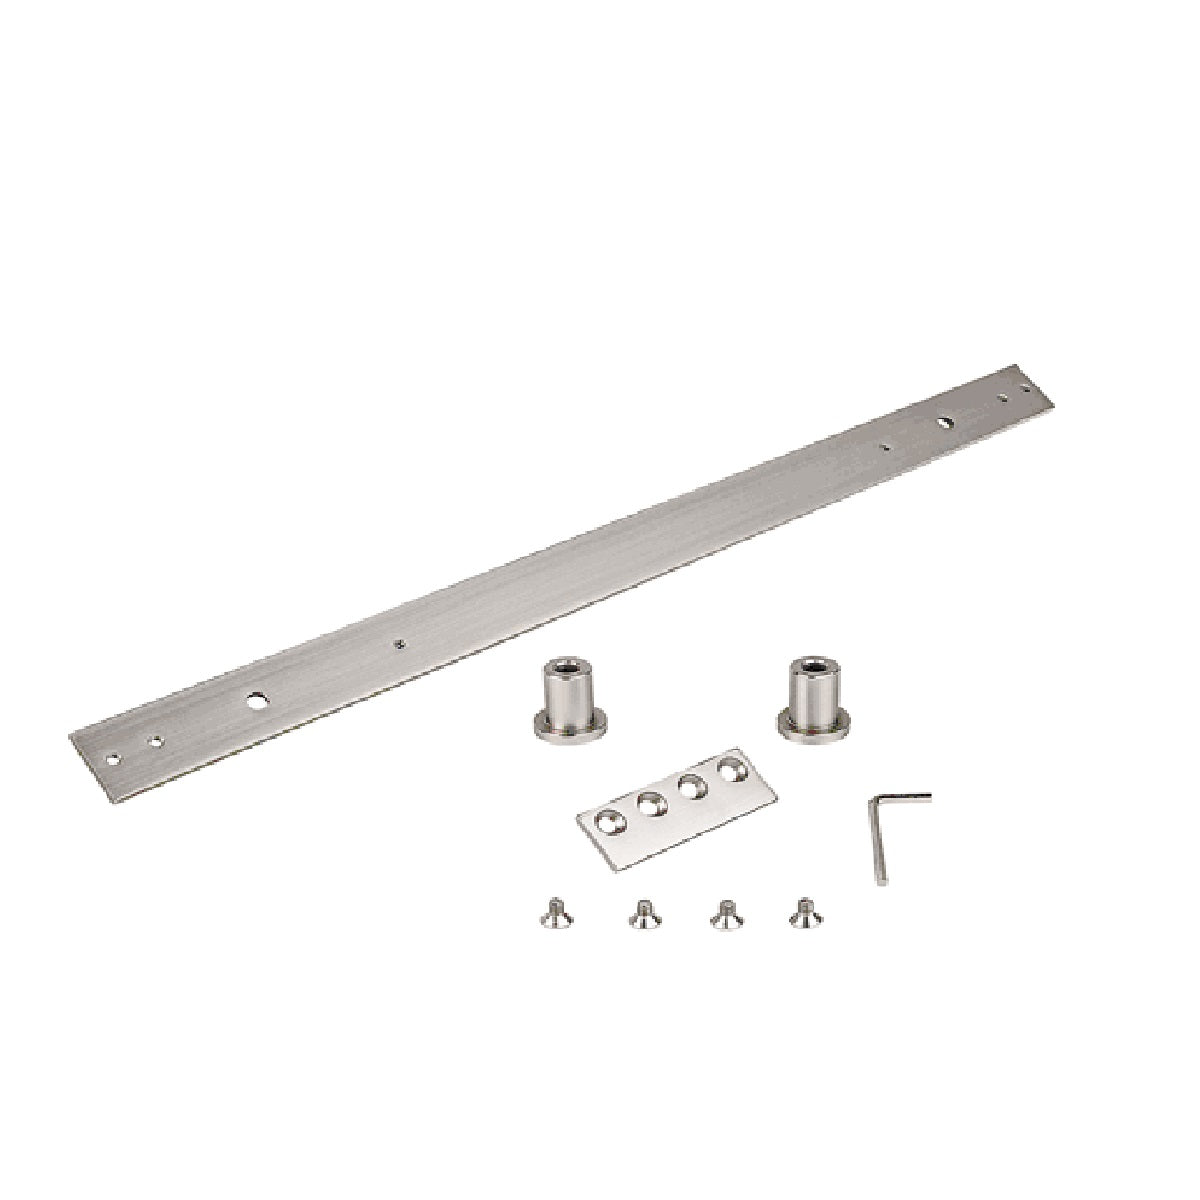 buy folding door hardware at cheap rate in bulk. wholesale & retail builders hardware tools store. home décor ideas, maintenance, repair replacement parts